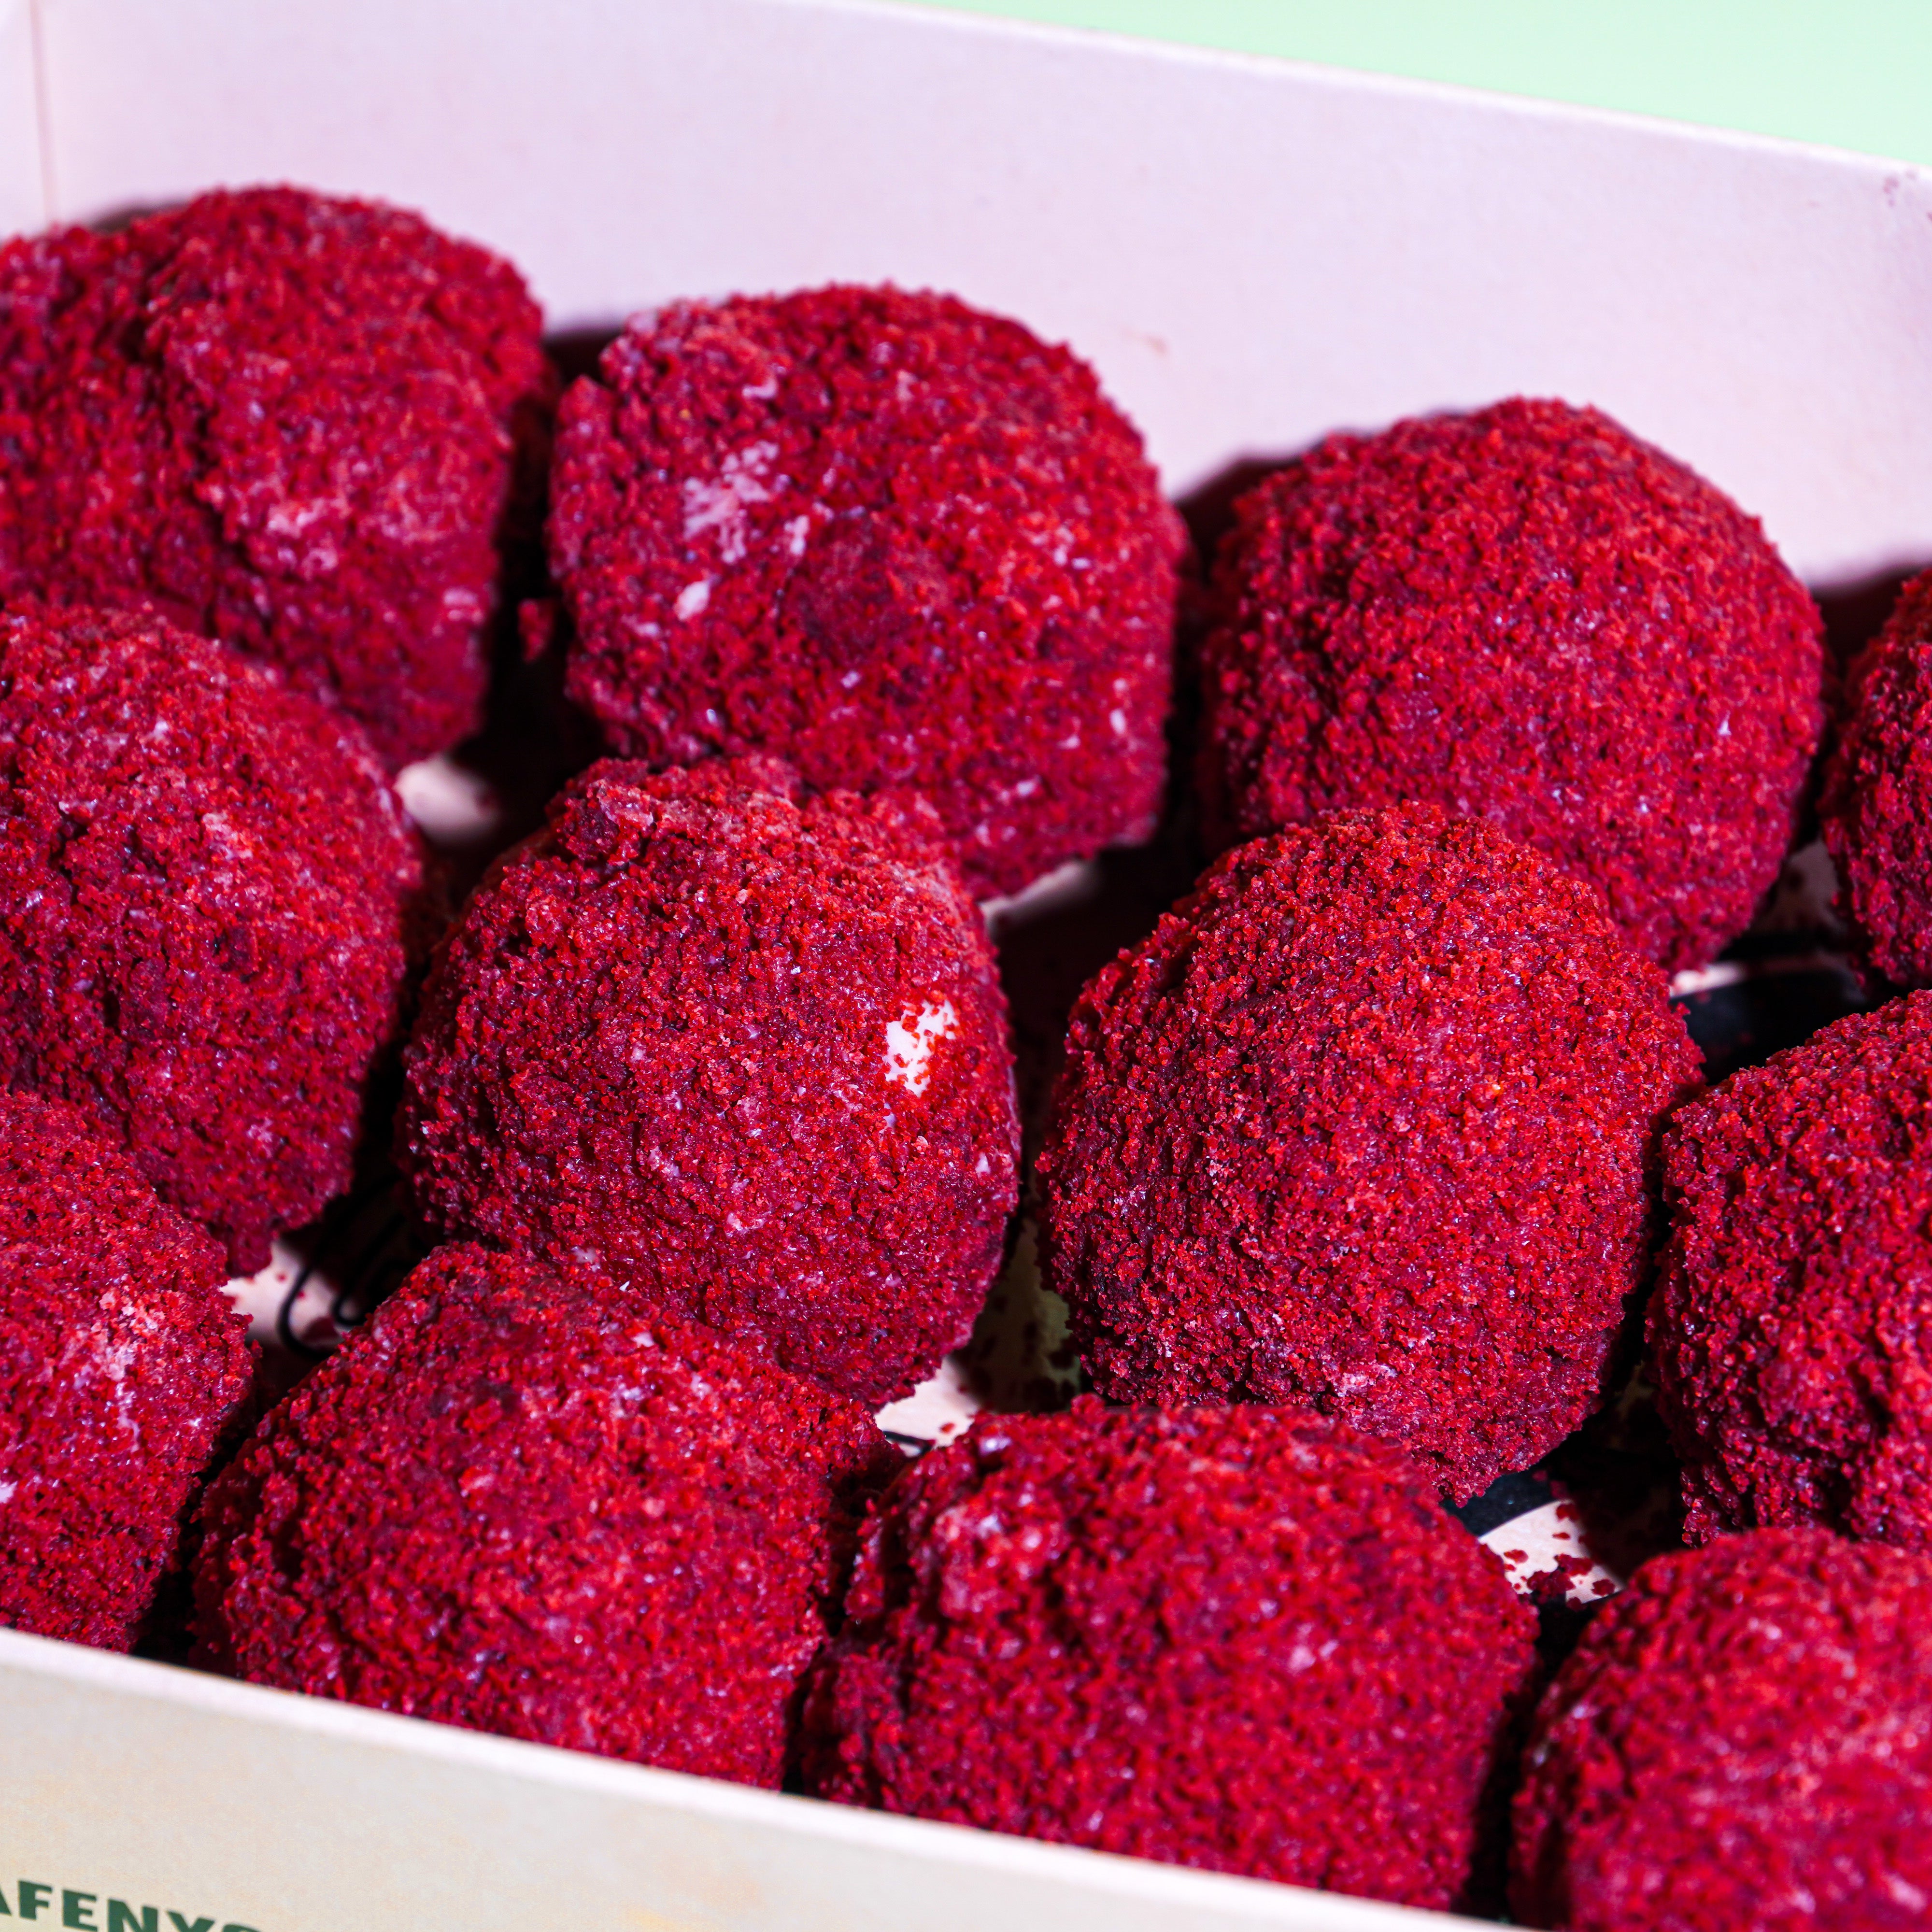 An enticing close-up image showcasing Red Velvet Truffles. The velvety texture of each truffle is beautifully captured, highlighting the rich red hue and delicate chocolate coating. This closeup provides a tempting glimpse into the decadent allure of these Red Velvet Truffles, inviting indulgence and delight for chocolate connoisseurs.